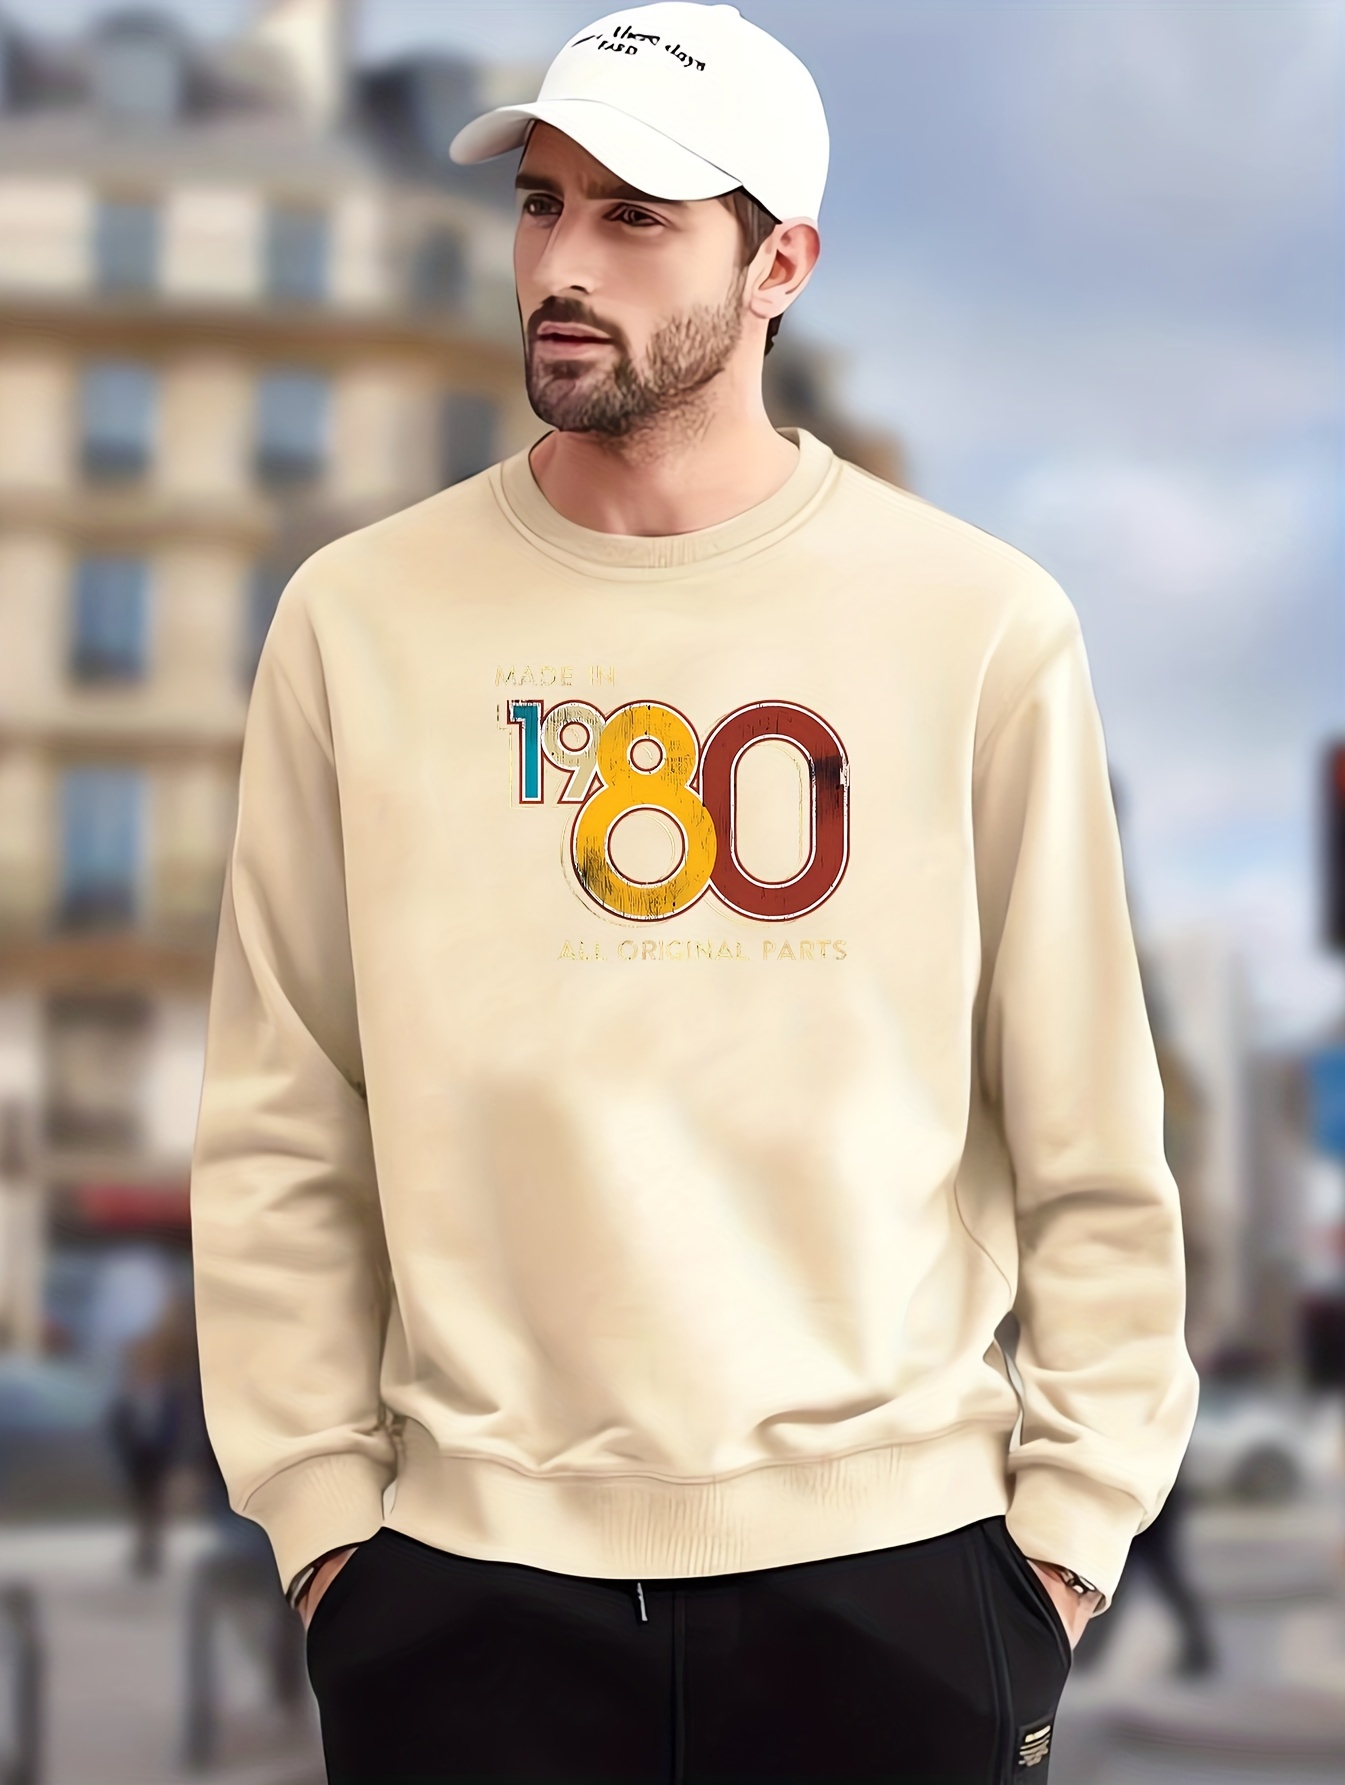 What Do You Want 1980 Print Trendy Sweatshirt Mens Casual Graphic